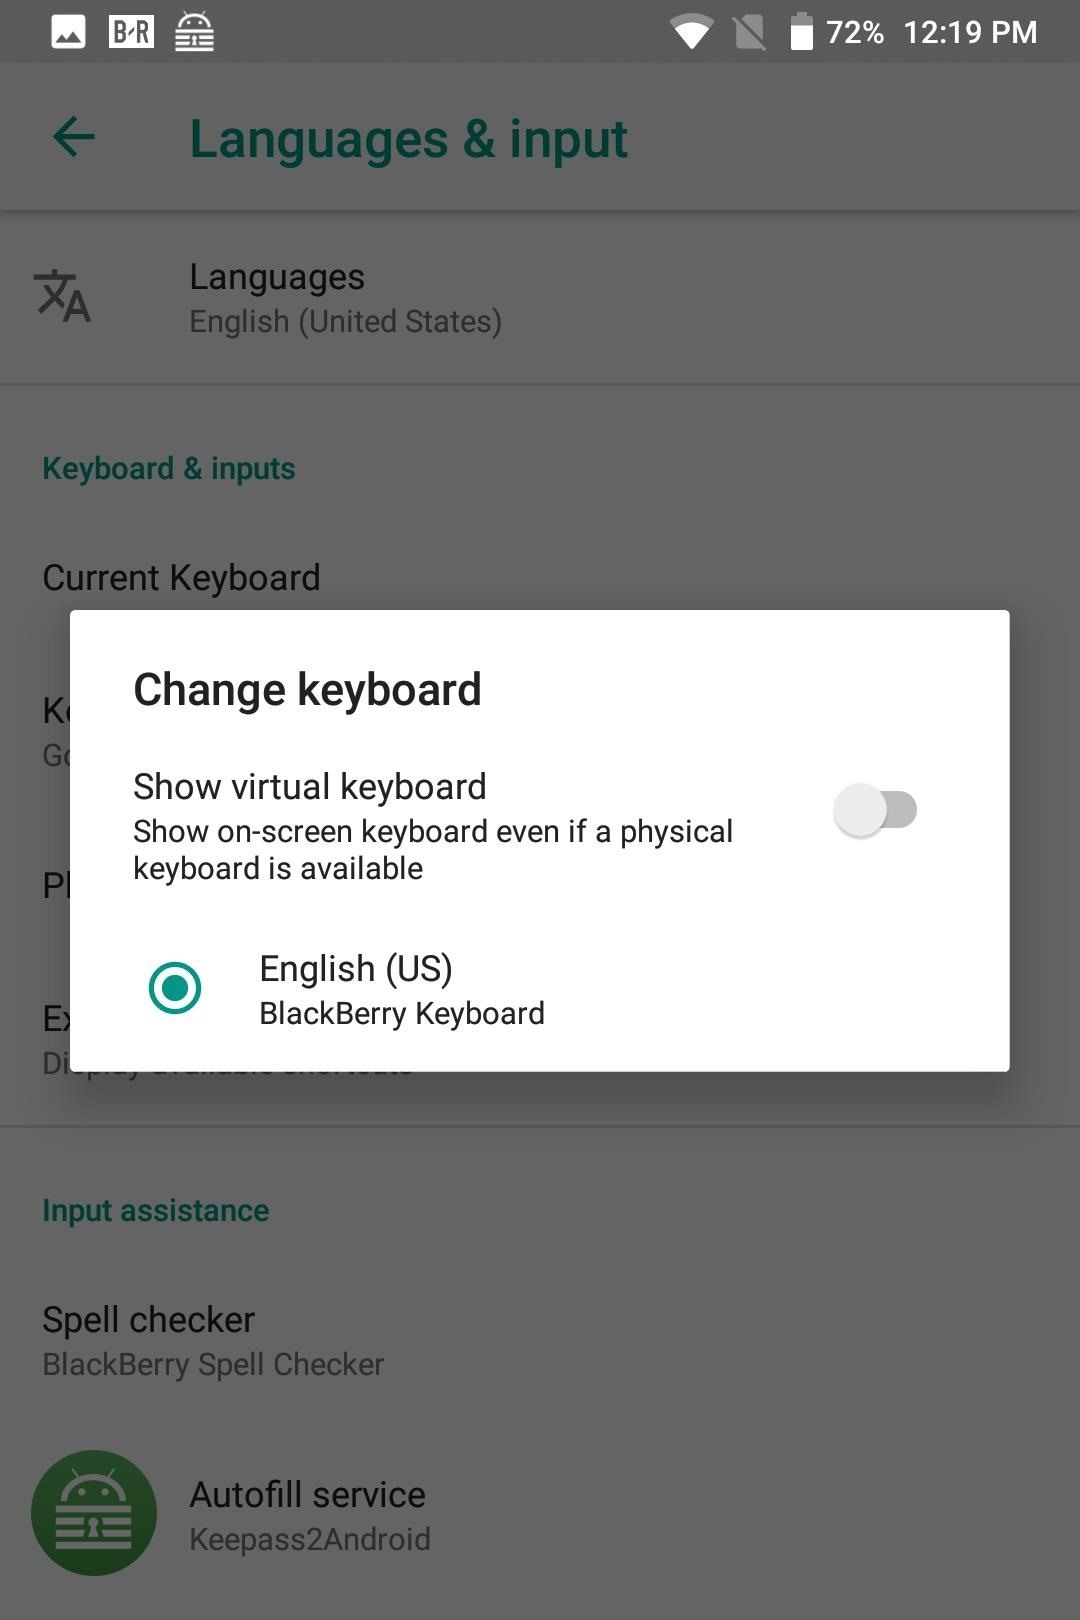 How to Remove the On-Screen Keyboard on Your BlackBerry KEYone or KEY2